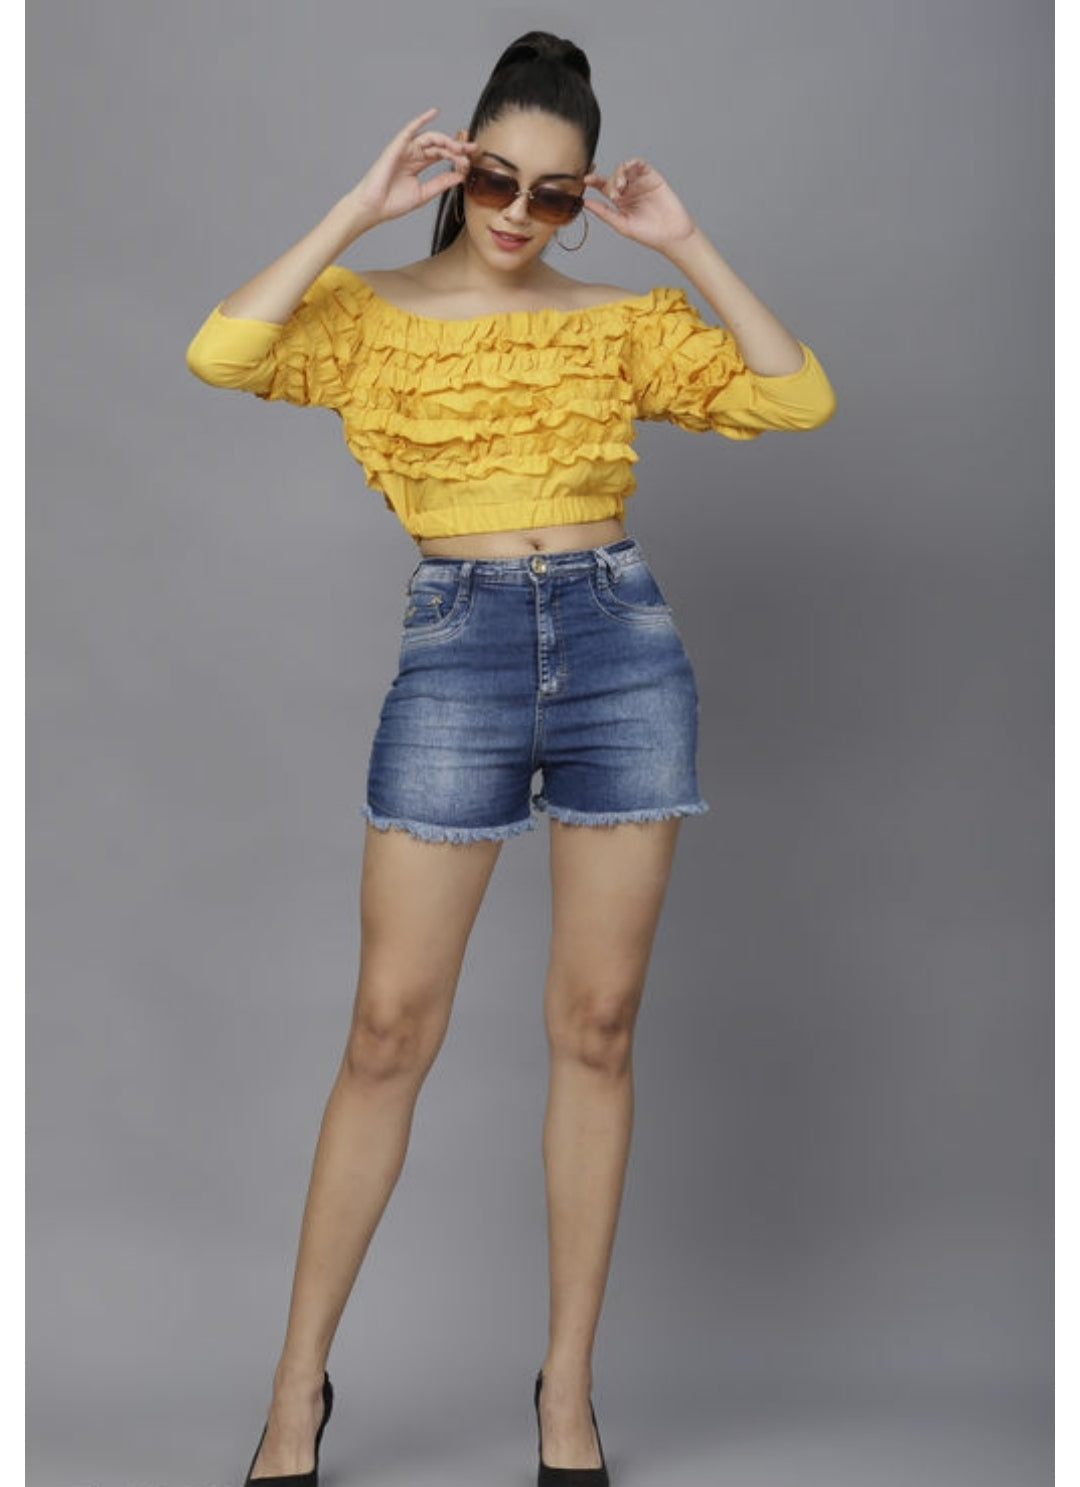 Imported Stylish Crepe Top For Women.